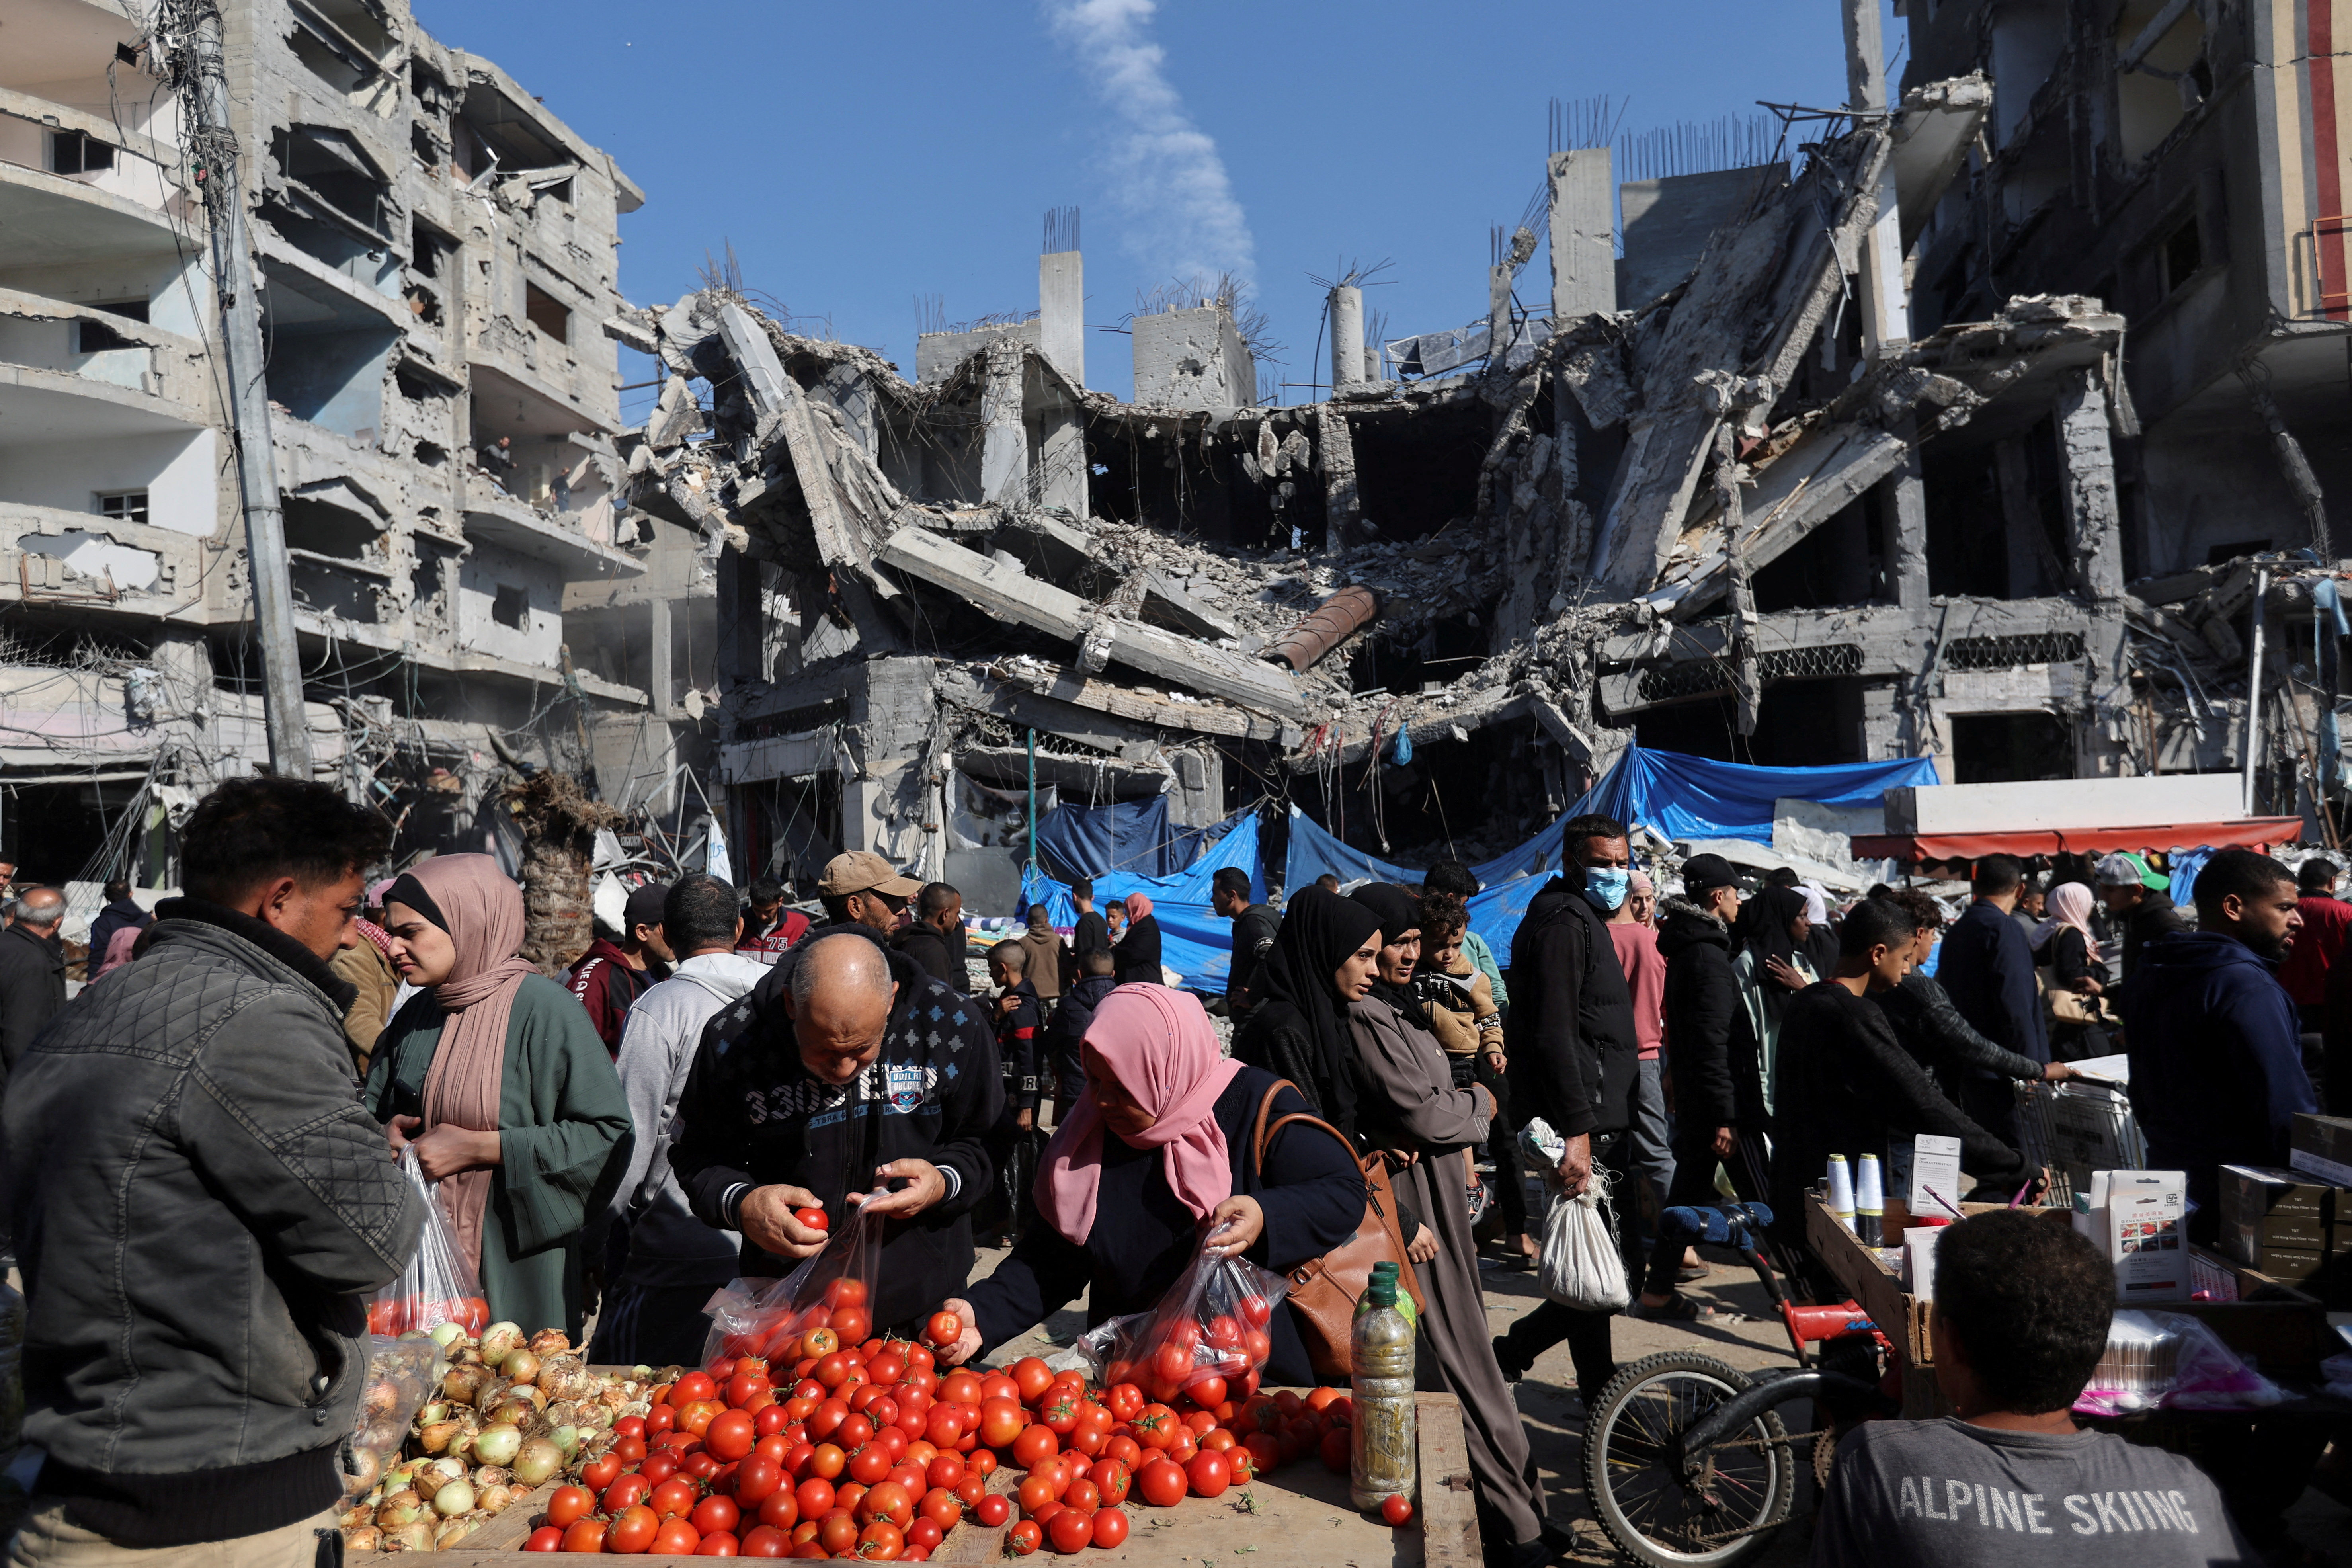 Palestinians shop near the ruins of houses and buildings destroyed in Israeli strikes during the conflict